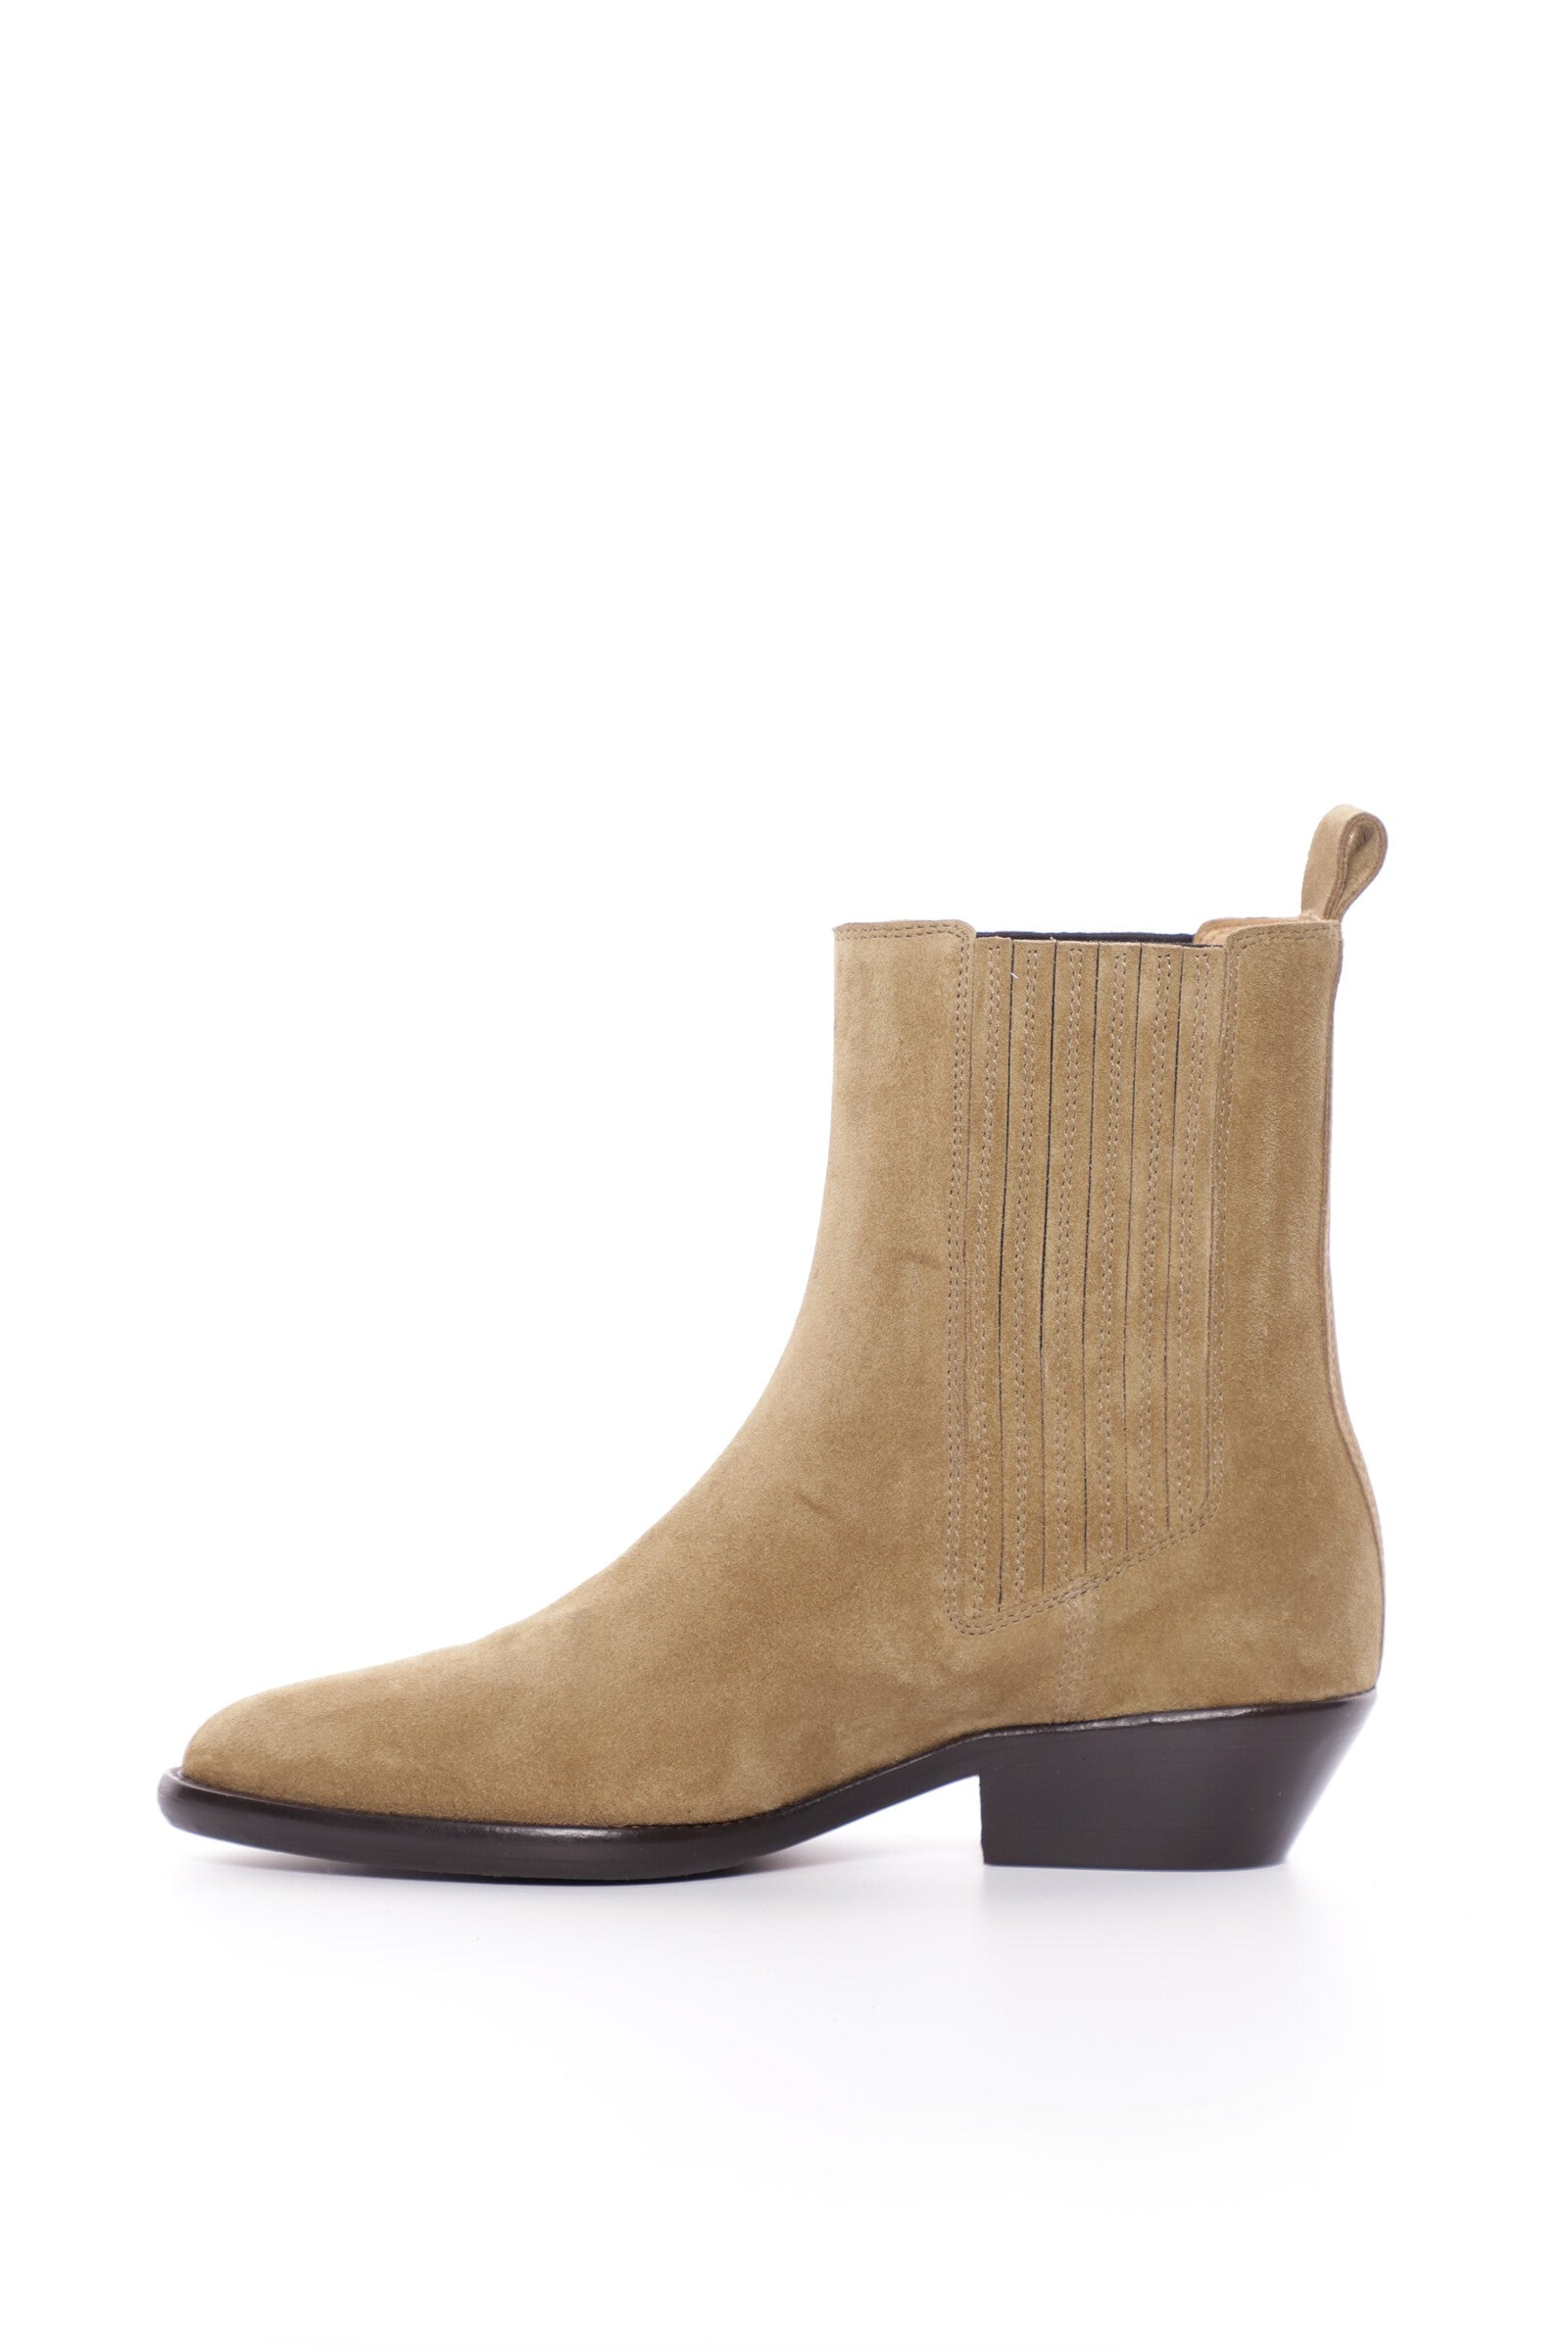 Boots delena Woman Taupe 10